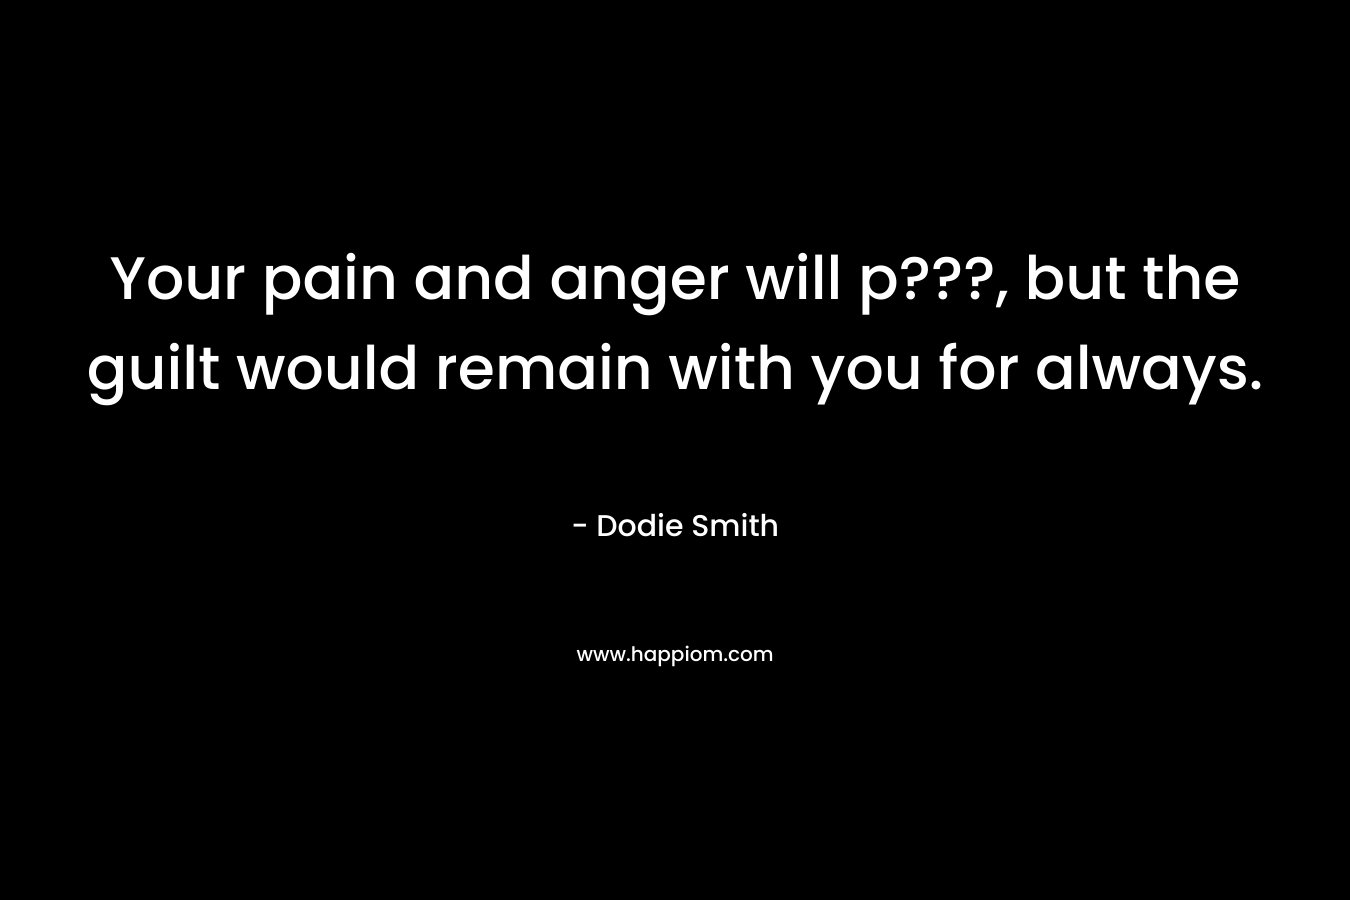 Your pain and anger will p???, but the guilt would remain with you for always. – Dodie Smith